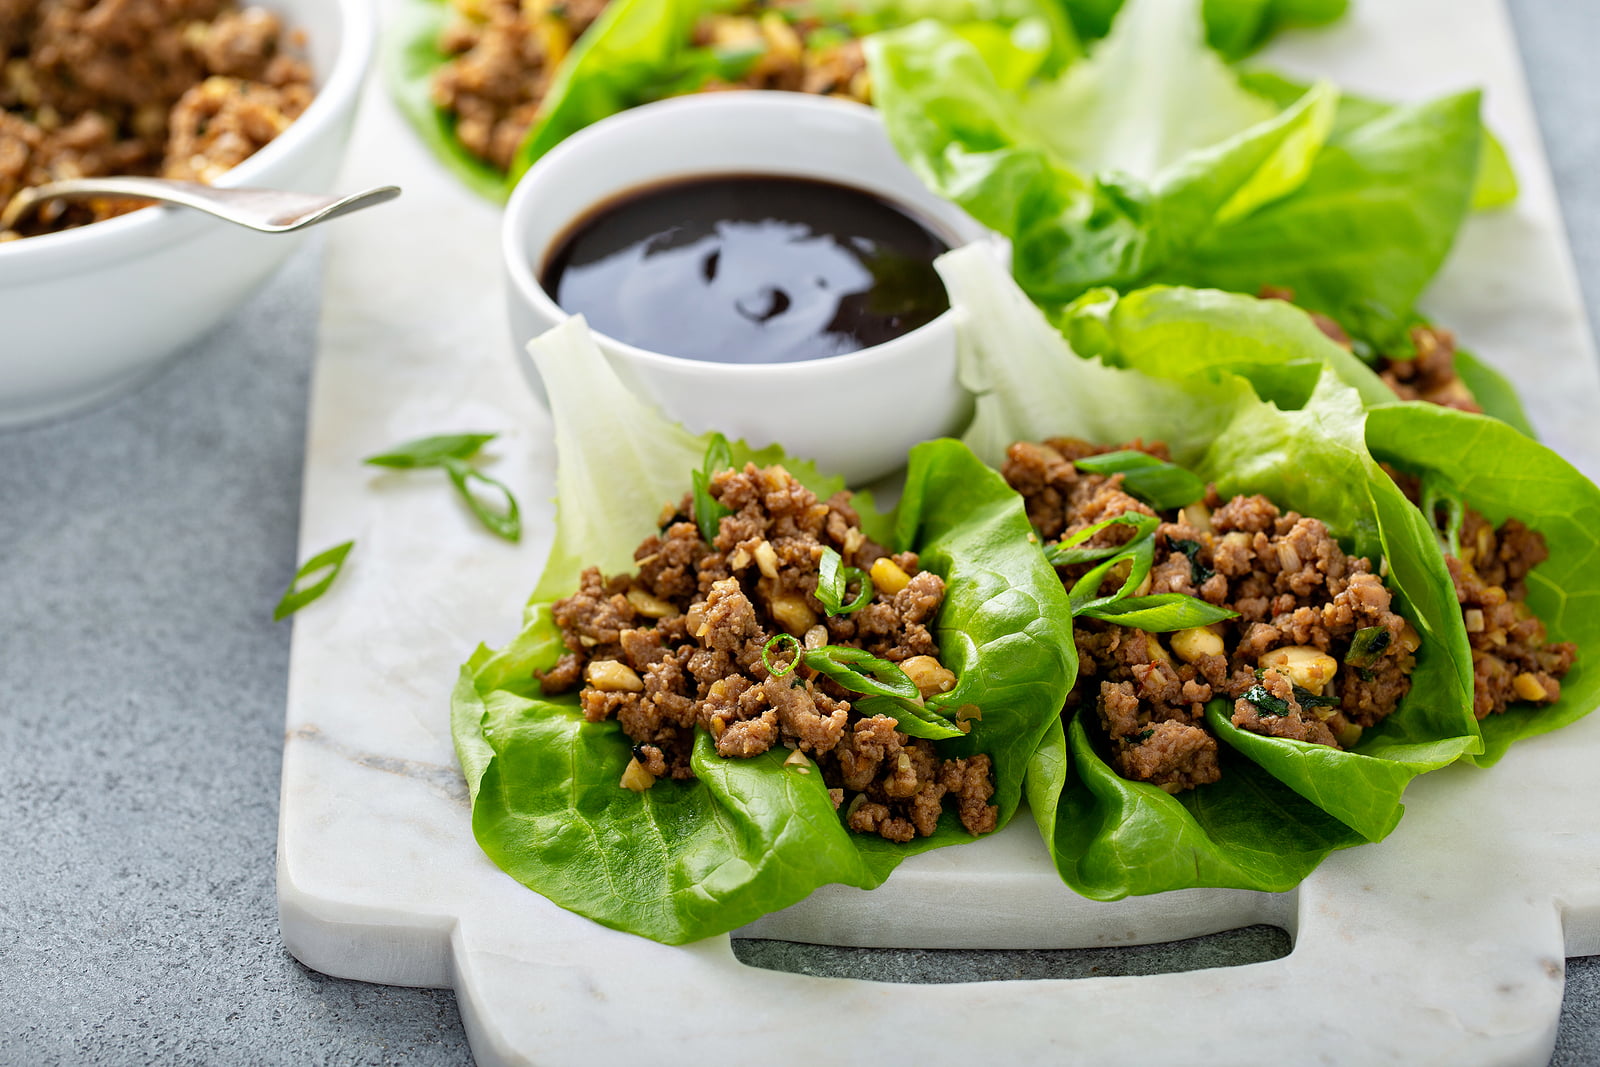 Try this tasty – and healthy – turkey lettuce wraps recipe